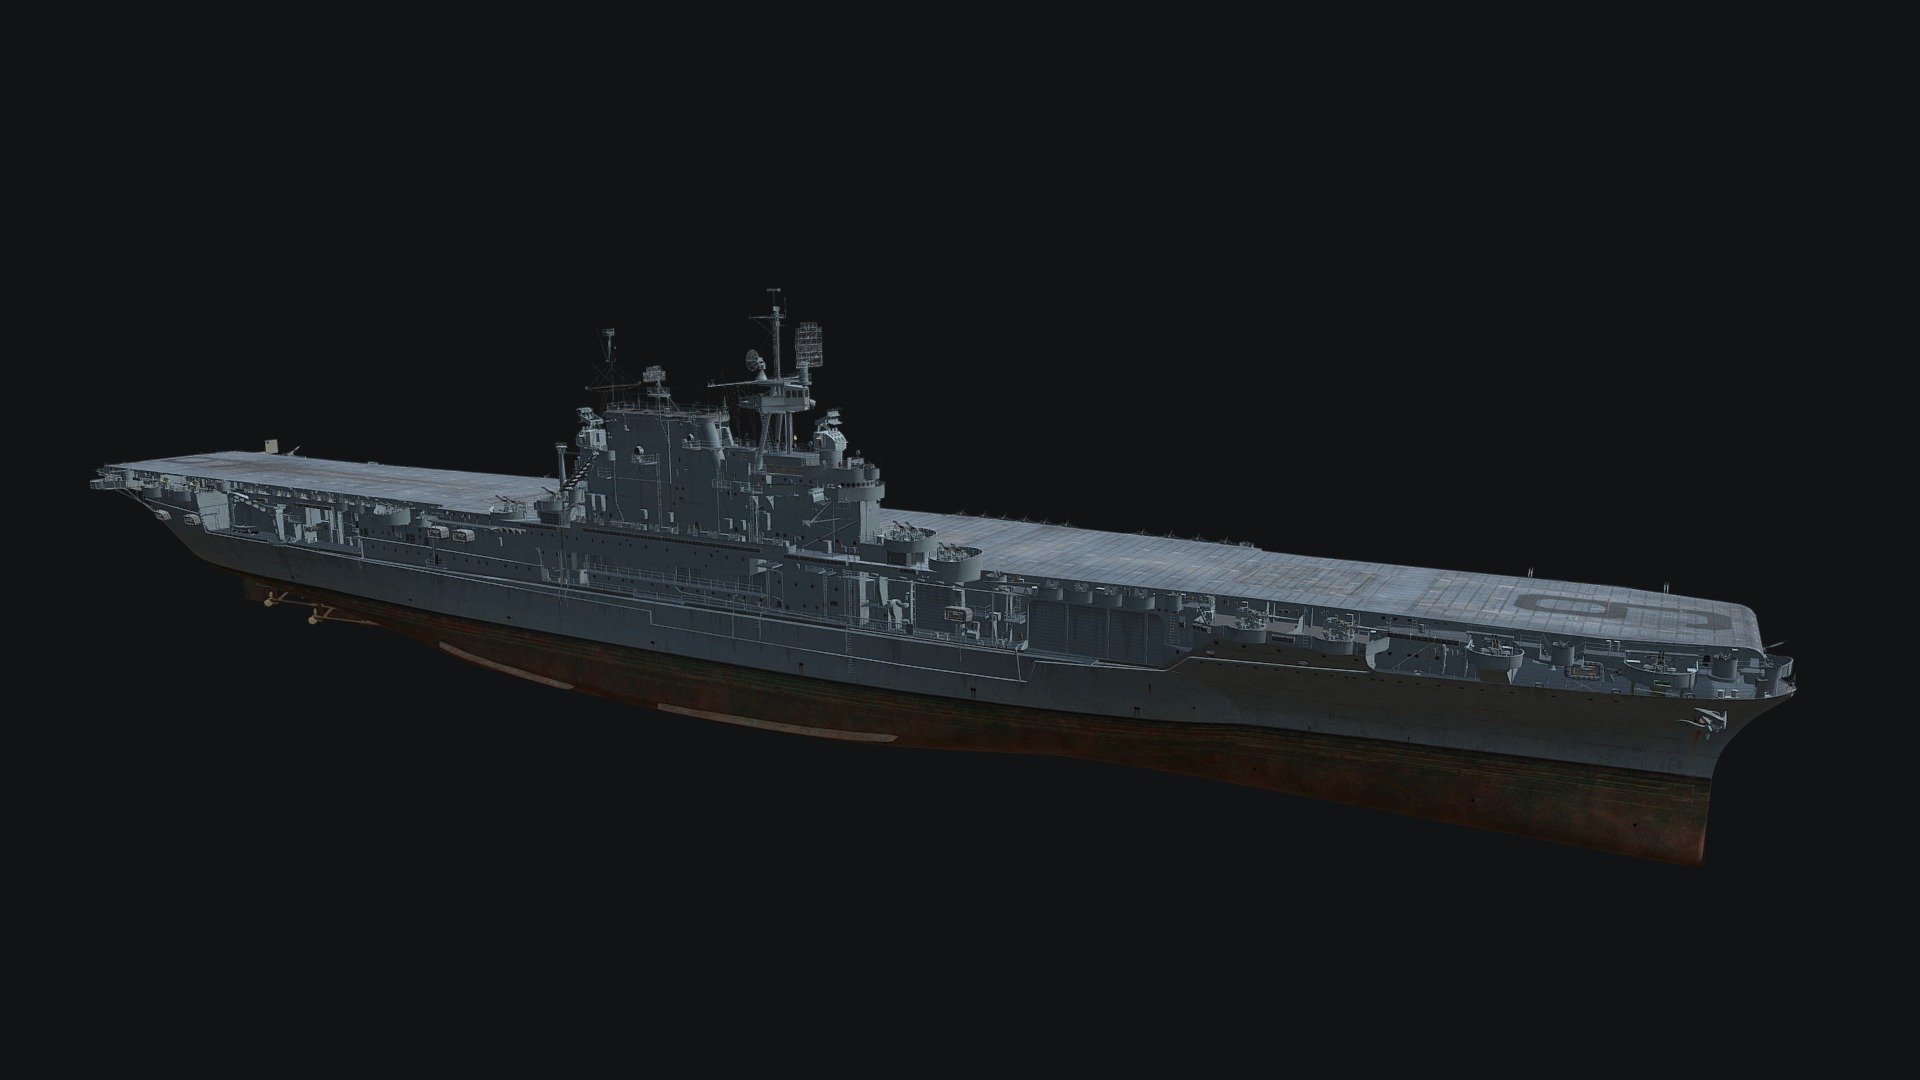 This model was developed by Wargaming for their popular game ‘World of Warships’. Play World of Warships now to send these ships into battle!

Use the following link to start playing!

https://worldofwarships.com/

Enterprise — American promo premium Tier VIII aircraft сarrier.

A Yorktown-class strike aircraft carrier that combined a number of key characteristics typical for this type of ship: a large air group, superbly assembled take-off and landing equipment that allowed it to launch a large number of squadrons, good speed, and powerful AA defenses 3d model